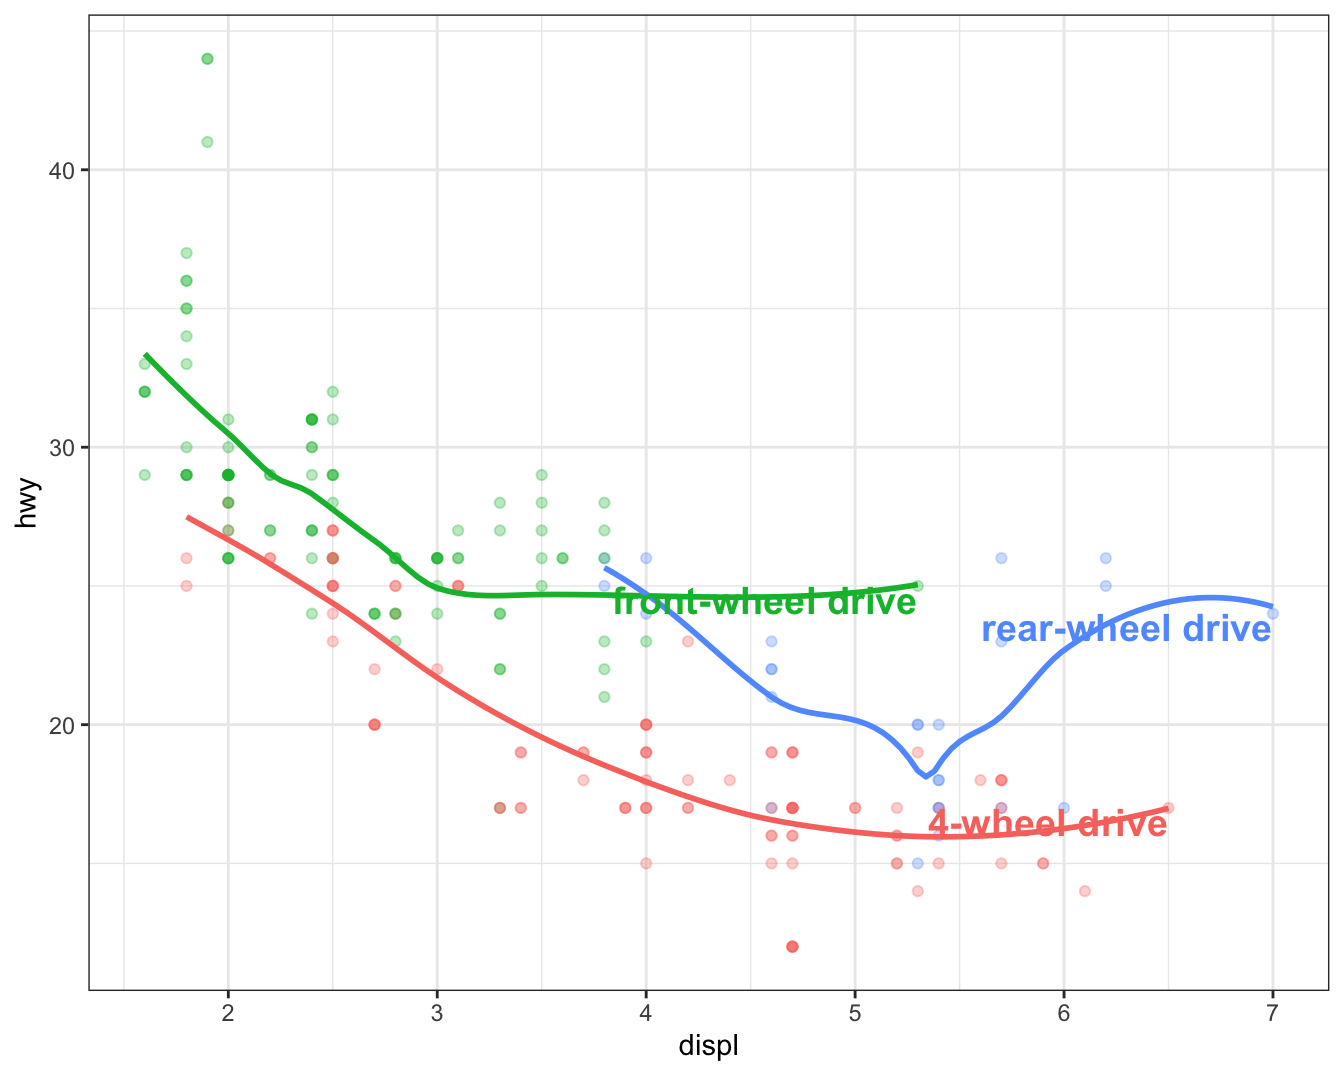 Scatterplot of highway mileage versus engine size where points are colored
by drive type. Smooth curves for each drive type are overlaid.
Text labels identify the curves as front-wheel, rear-wheel, and 4-wheel.